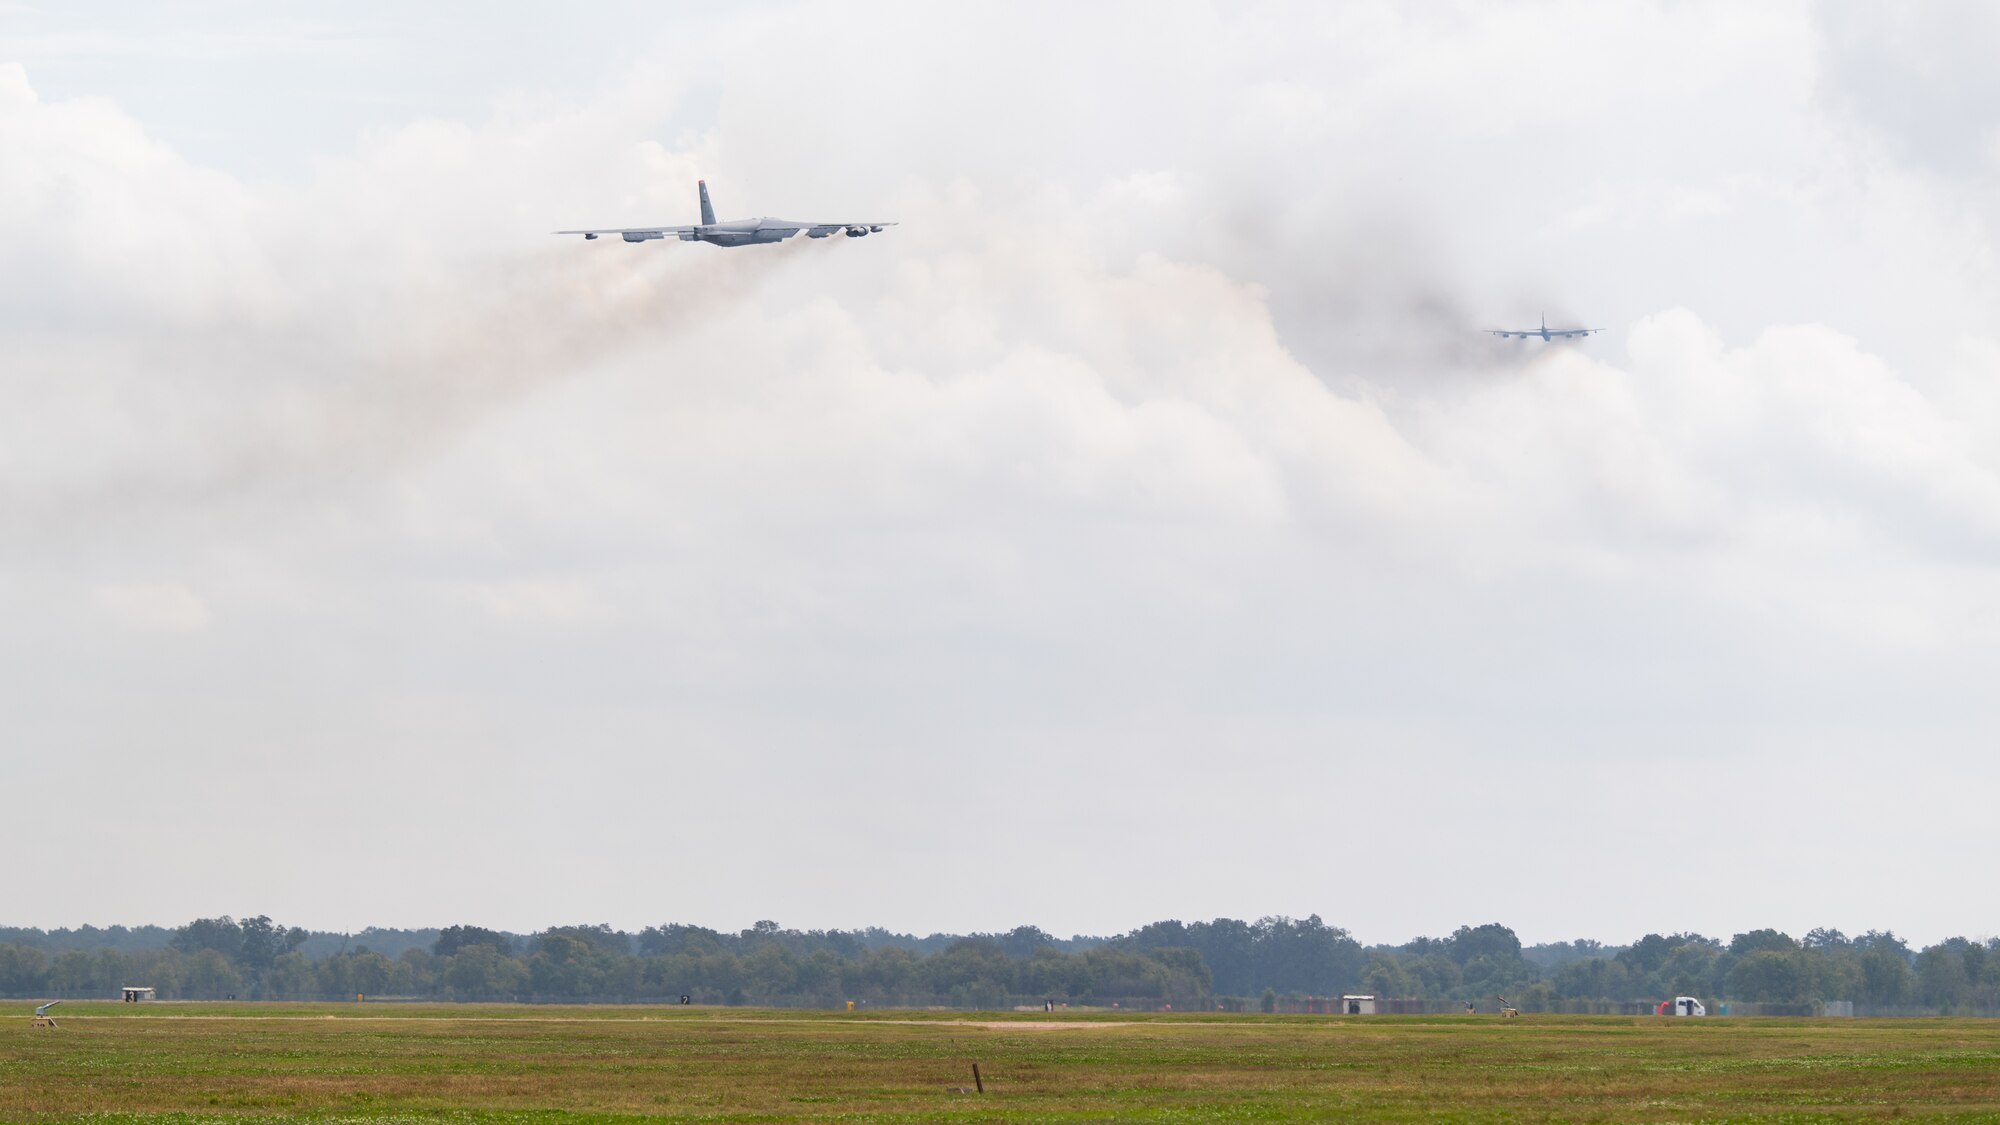 Two B-52H Stratofortresses take off from Barksdale Air Force Base, La., during Global Thunder 21 Oct. 23, 2020. Strategic bomber missions represent U.S. commitment to our allies and enhancing regional security. (U.S. Air Force photo by Airman 1st Class Jacob B. Wrightsman)